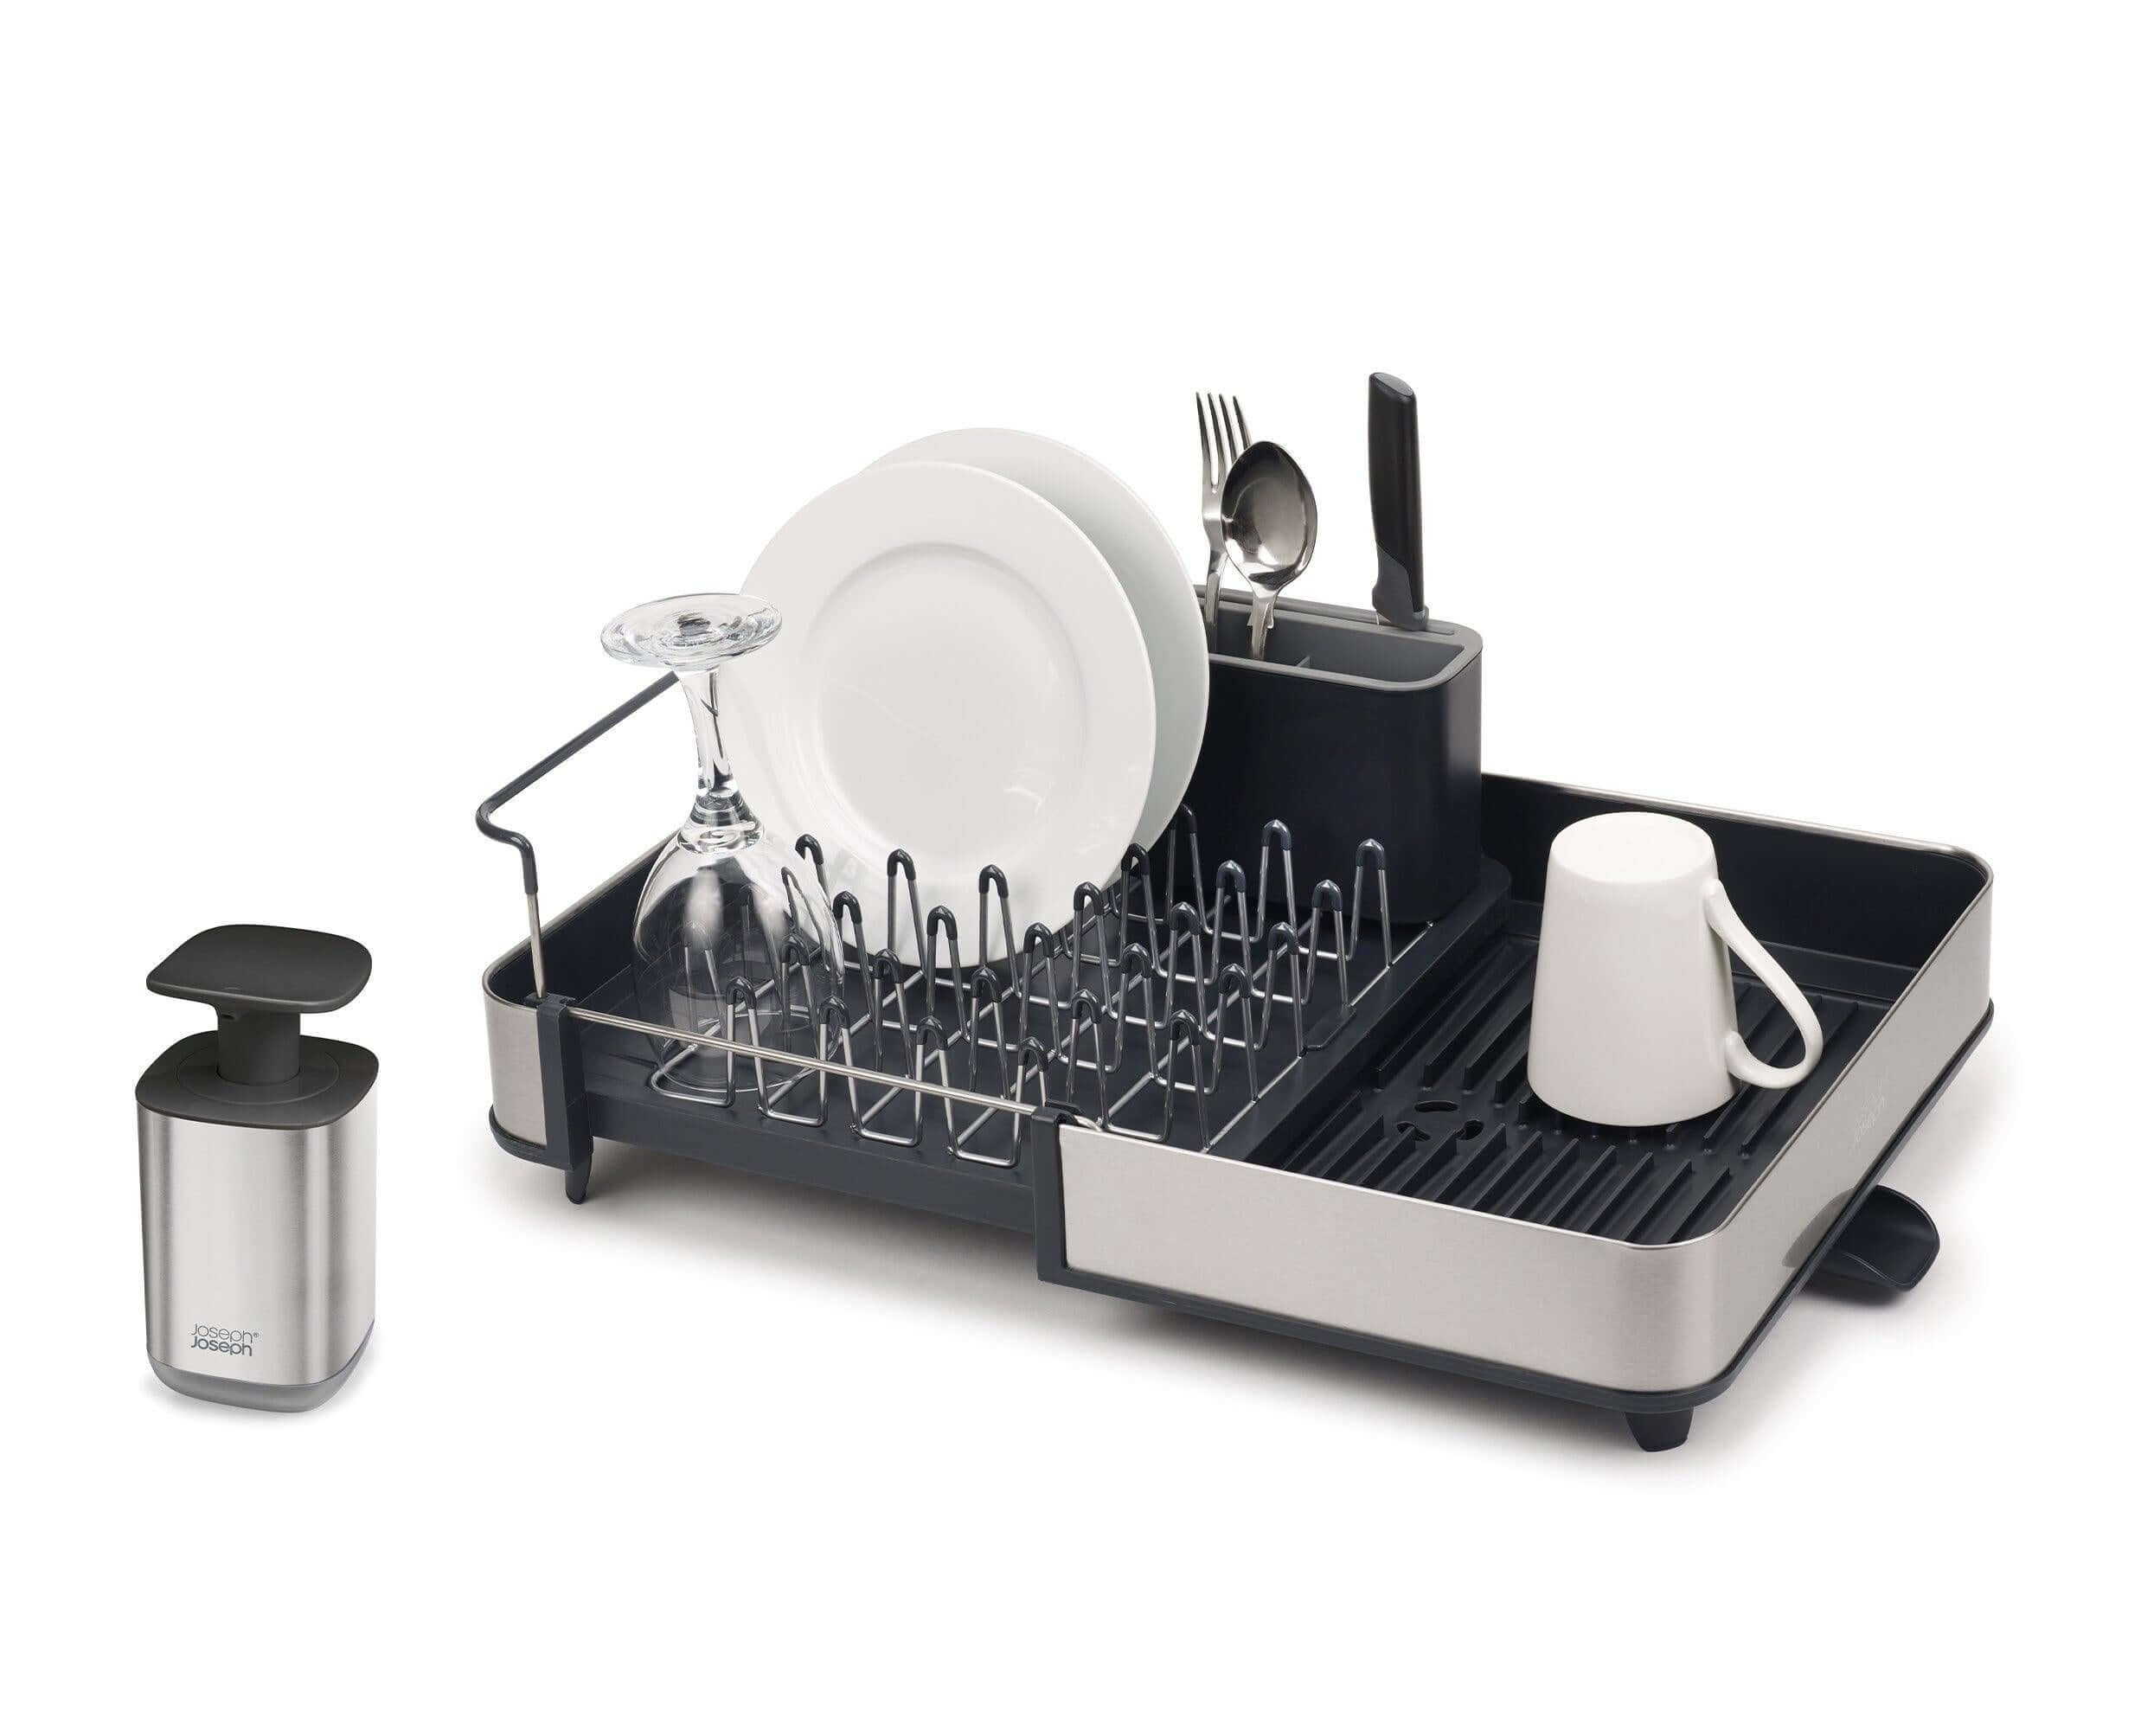 BEON.COM.AU This stylish set includes two highly-functional products to help make your sink-space shine. Dish rack extends to hold more items when needed Features draining spout, chopping board rail, raised ribs to prevent water being trapped and a movable cutlery pot Soap pump features large, easy-push head... Joseph Joseph at BEON.COM.AU